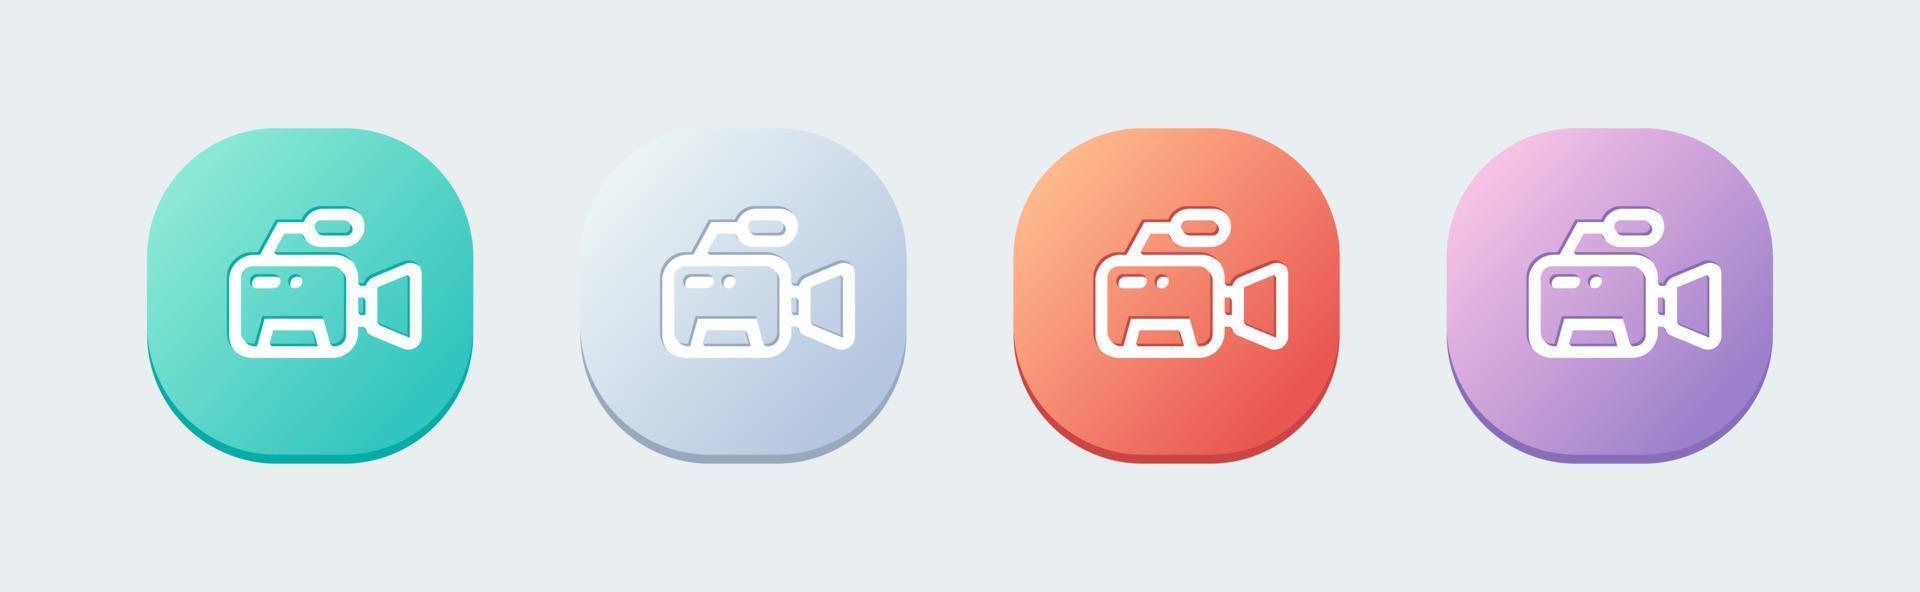 Video camera line icon in flat design style. Movie equipment signs vector illustration.